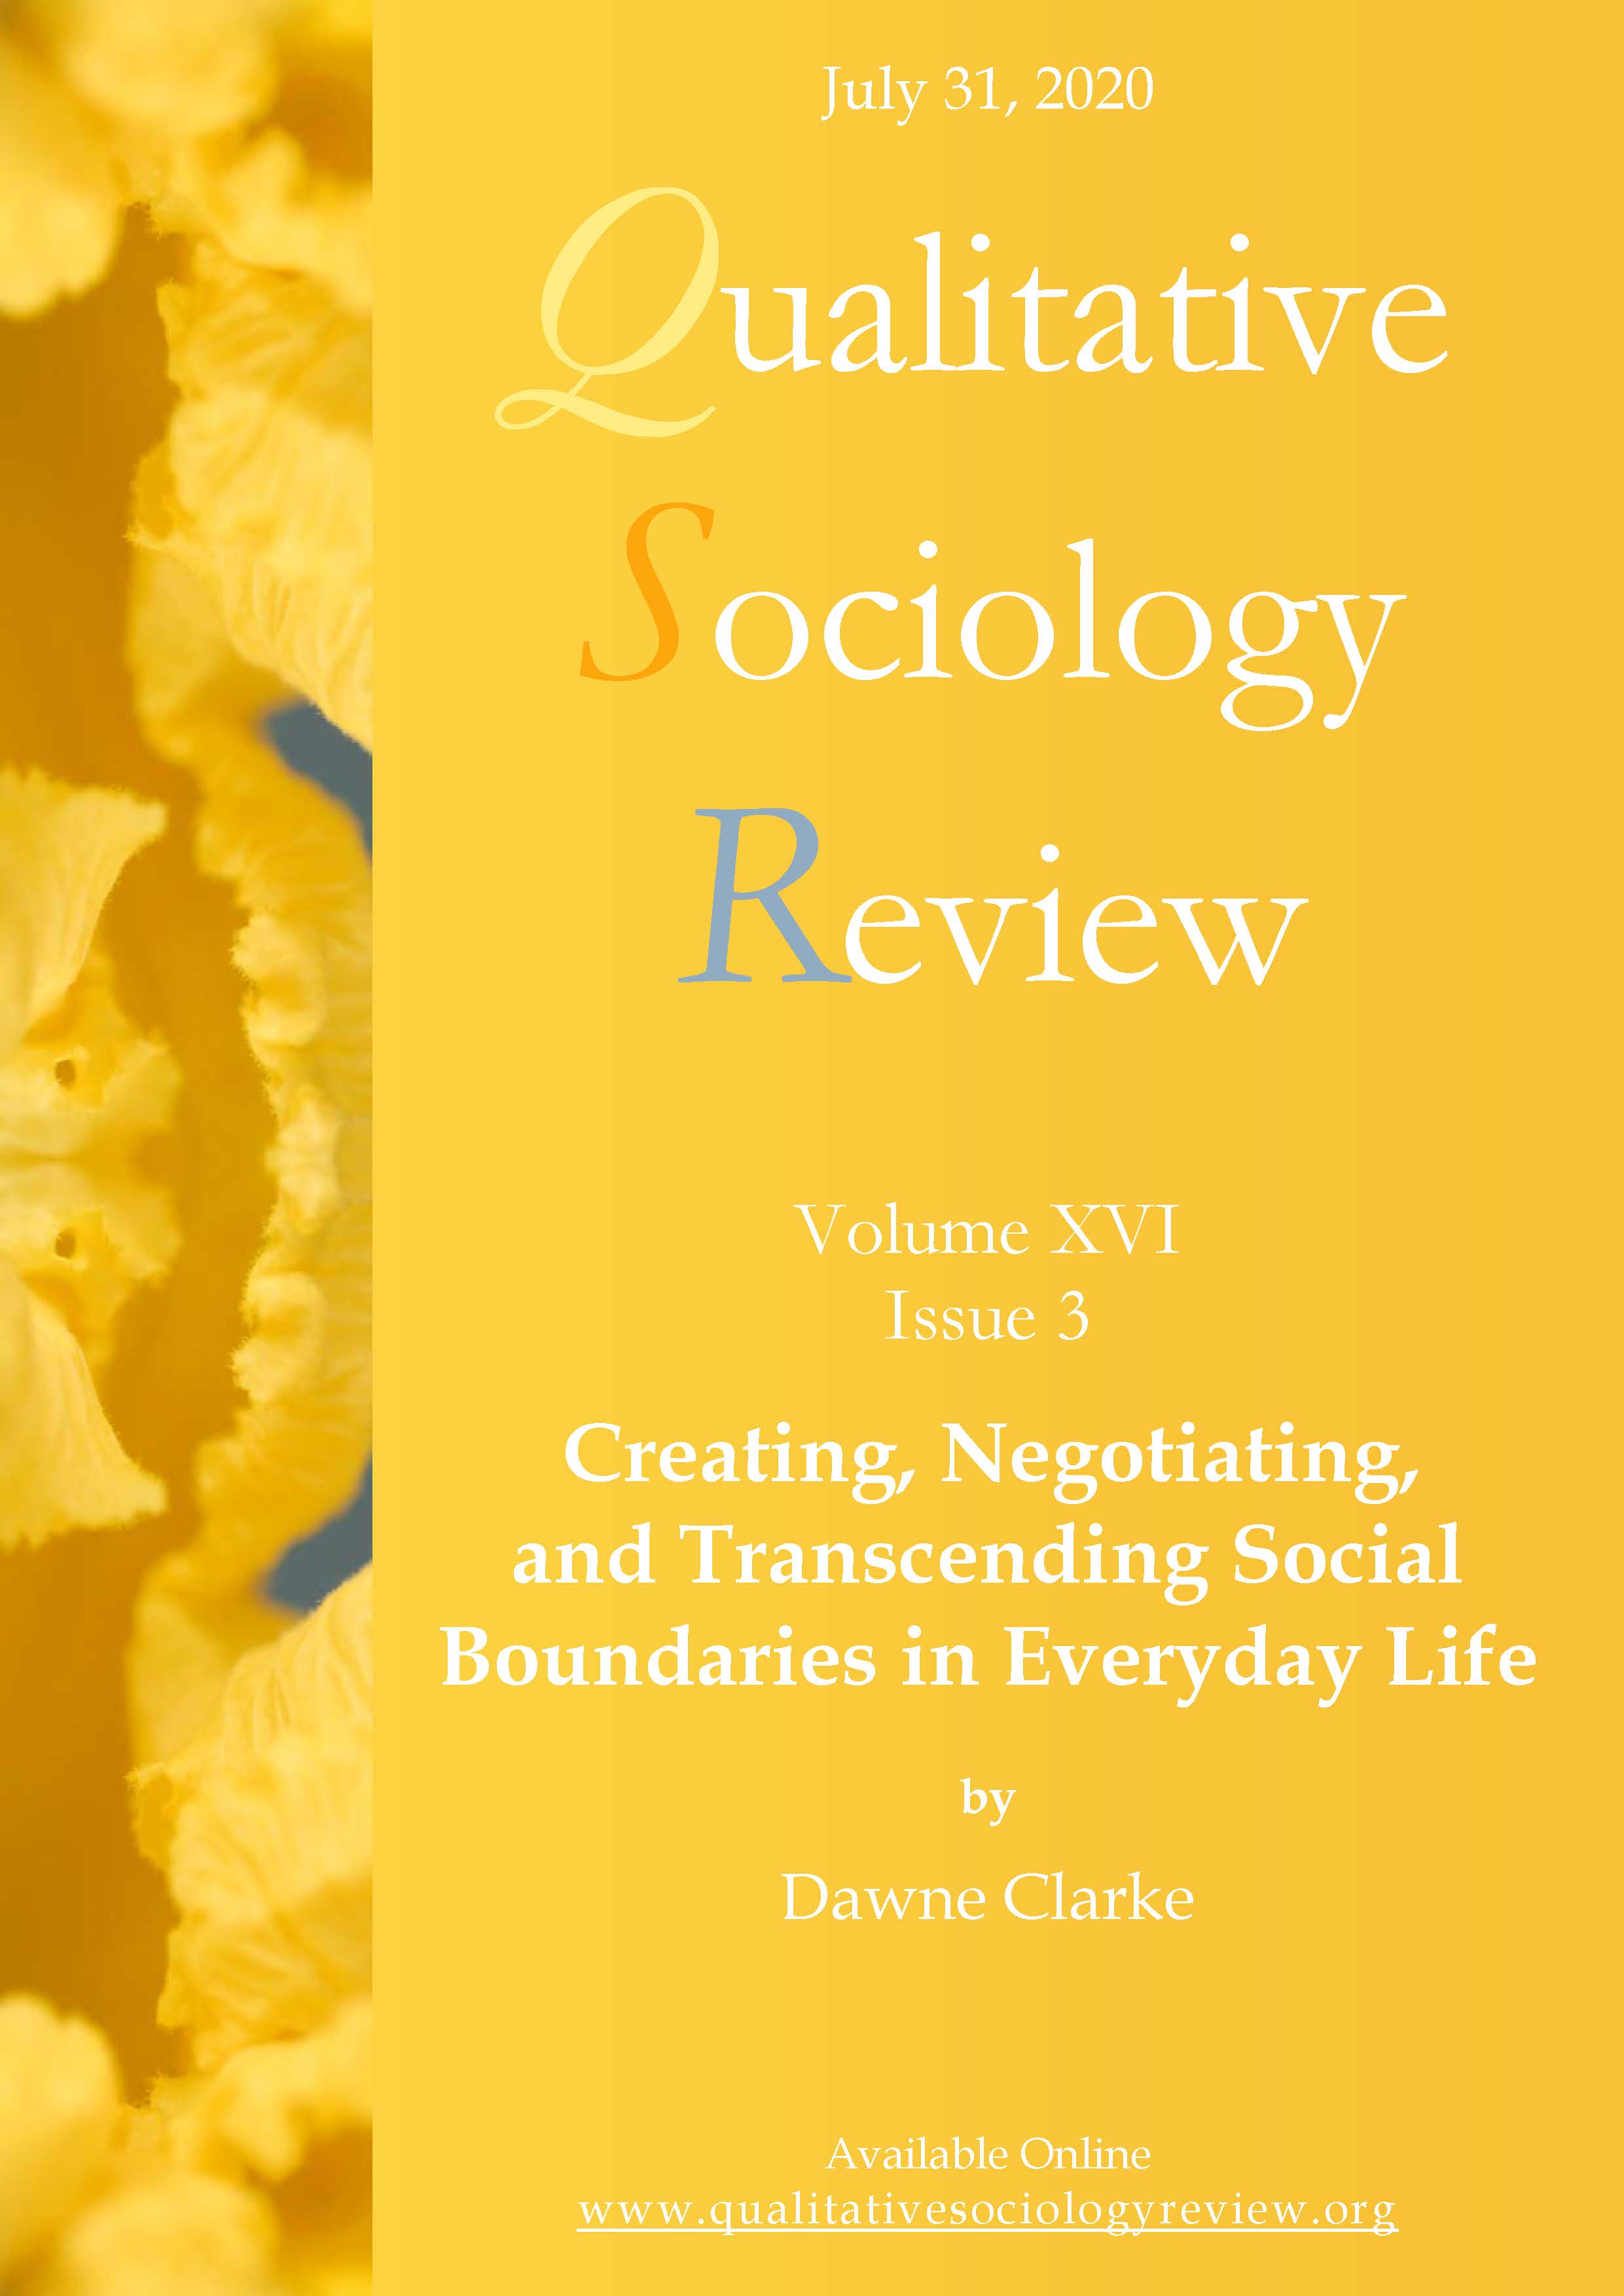 An Introduction to the Special Issue from 2018’s Qualitative Analysis Conference: "Creating, Negotiating, and Transcending Social Boundaries in Everyday Life"